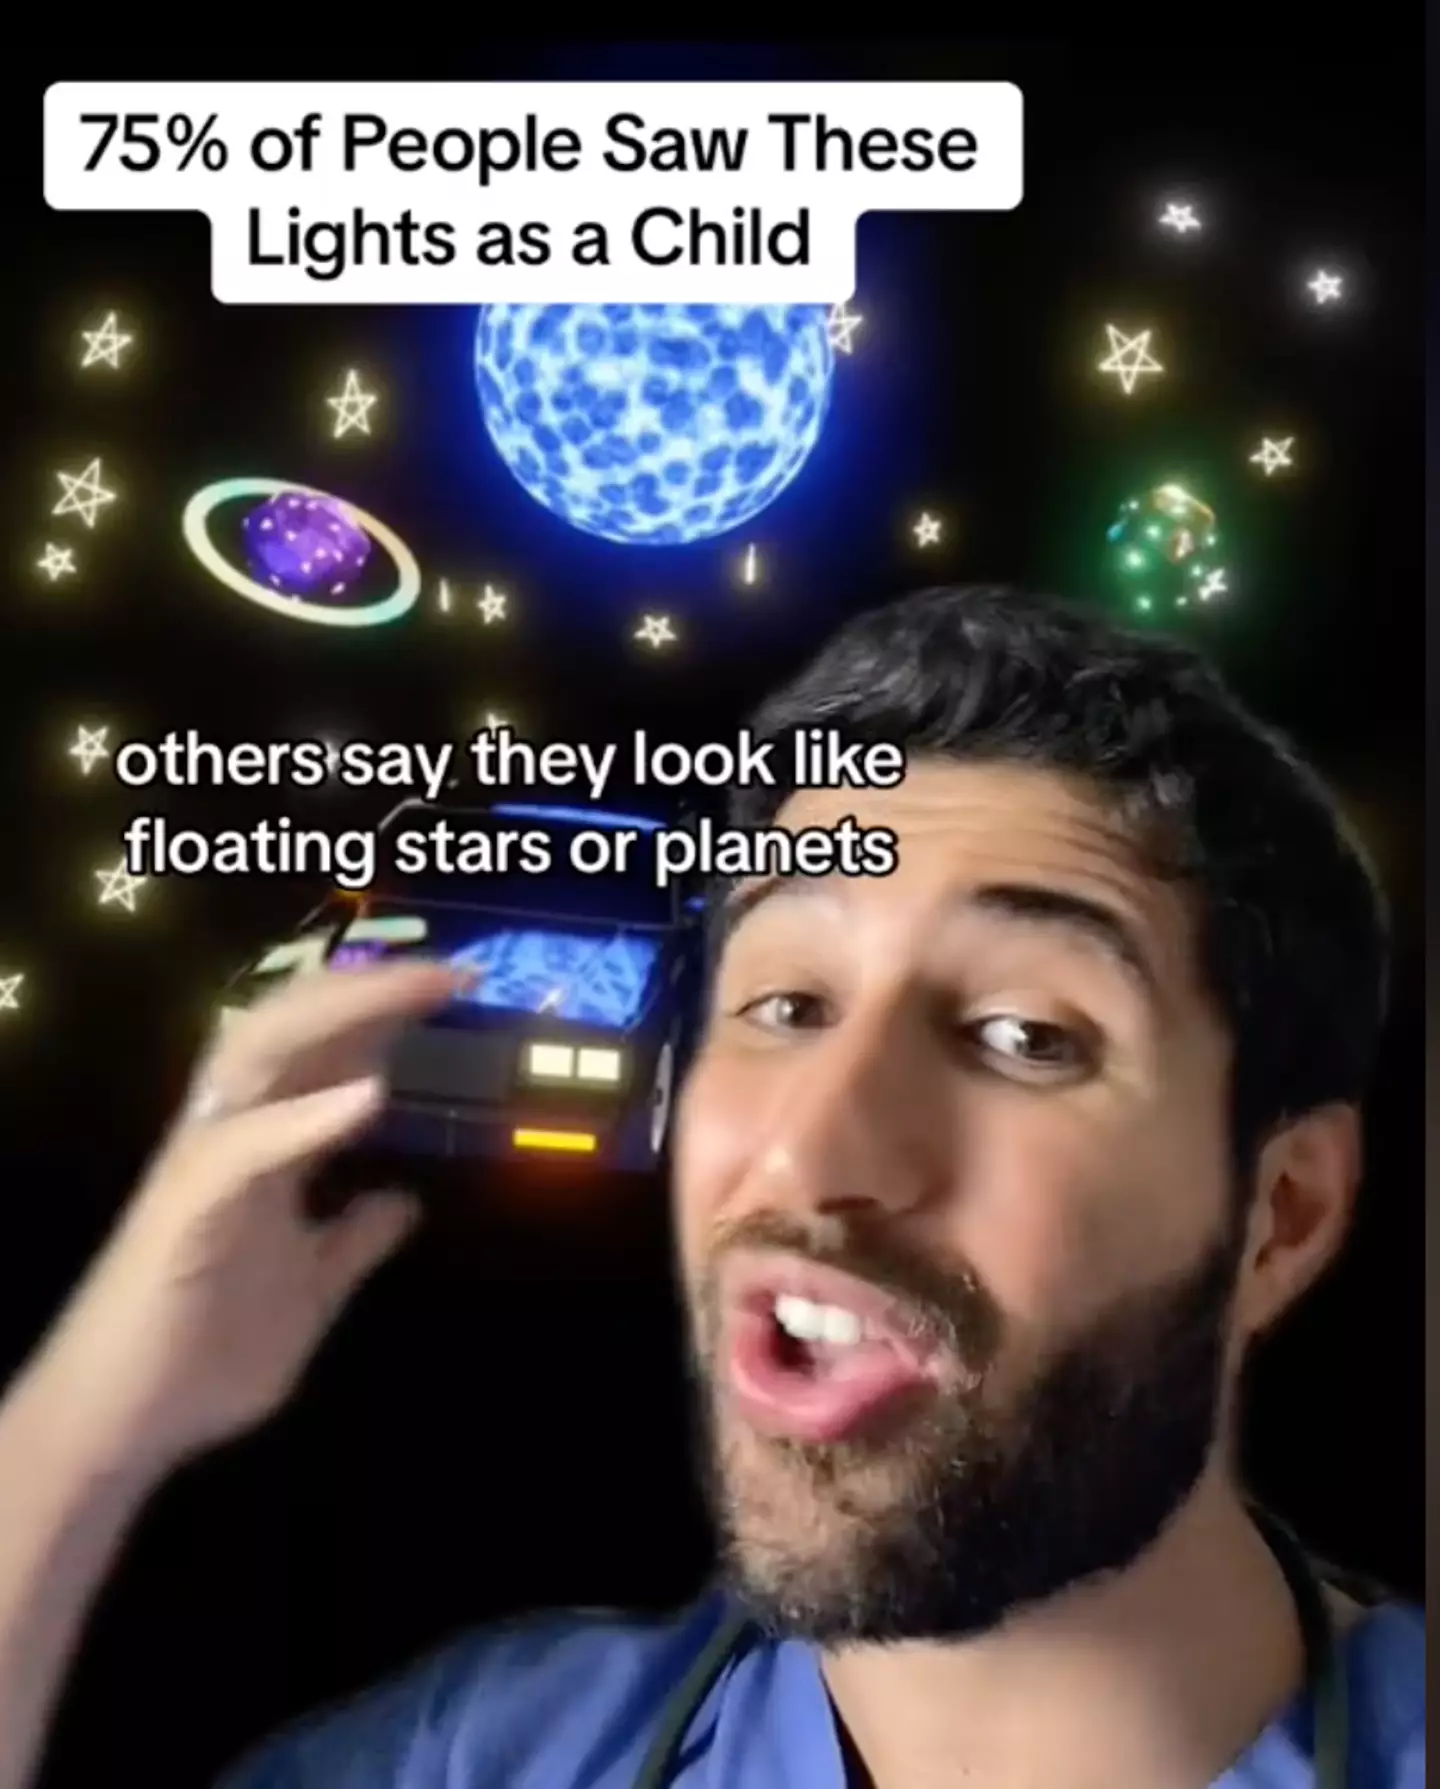 Did you see the lights?